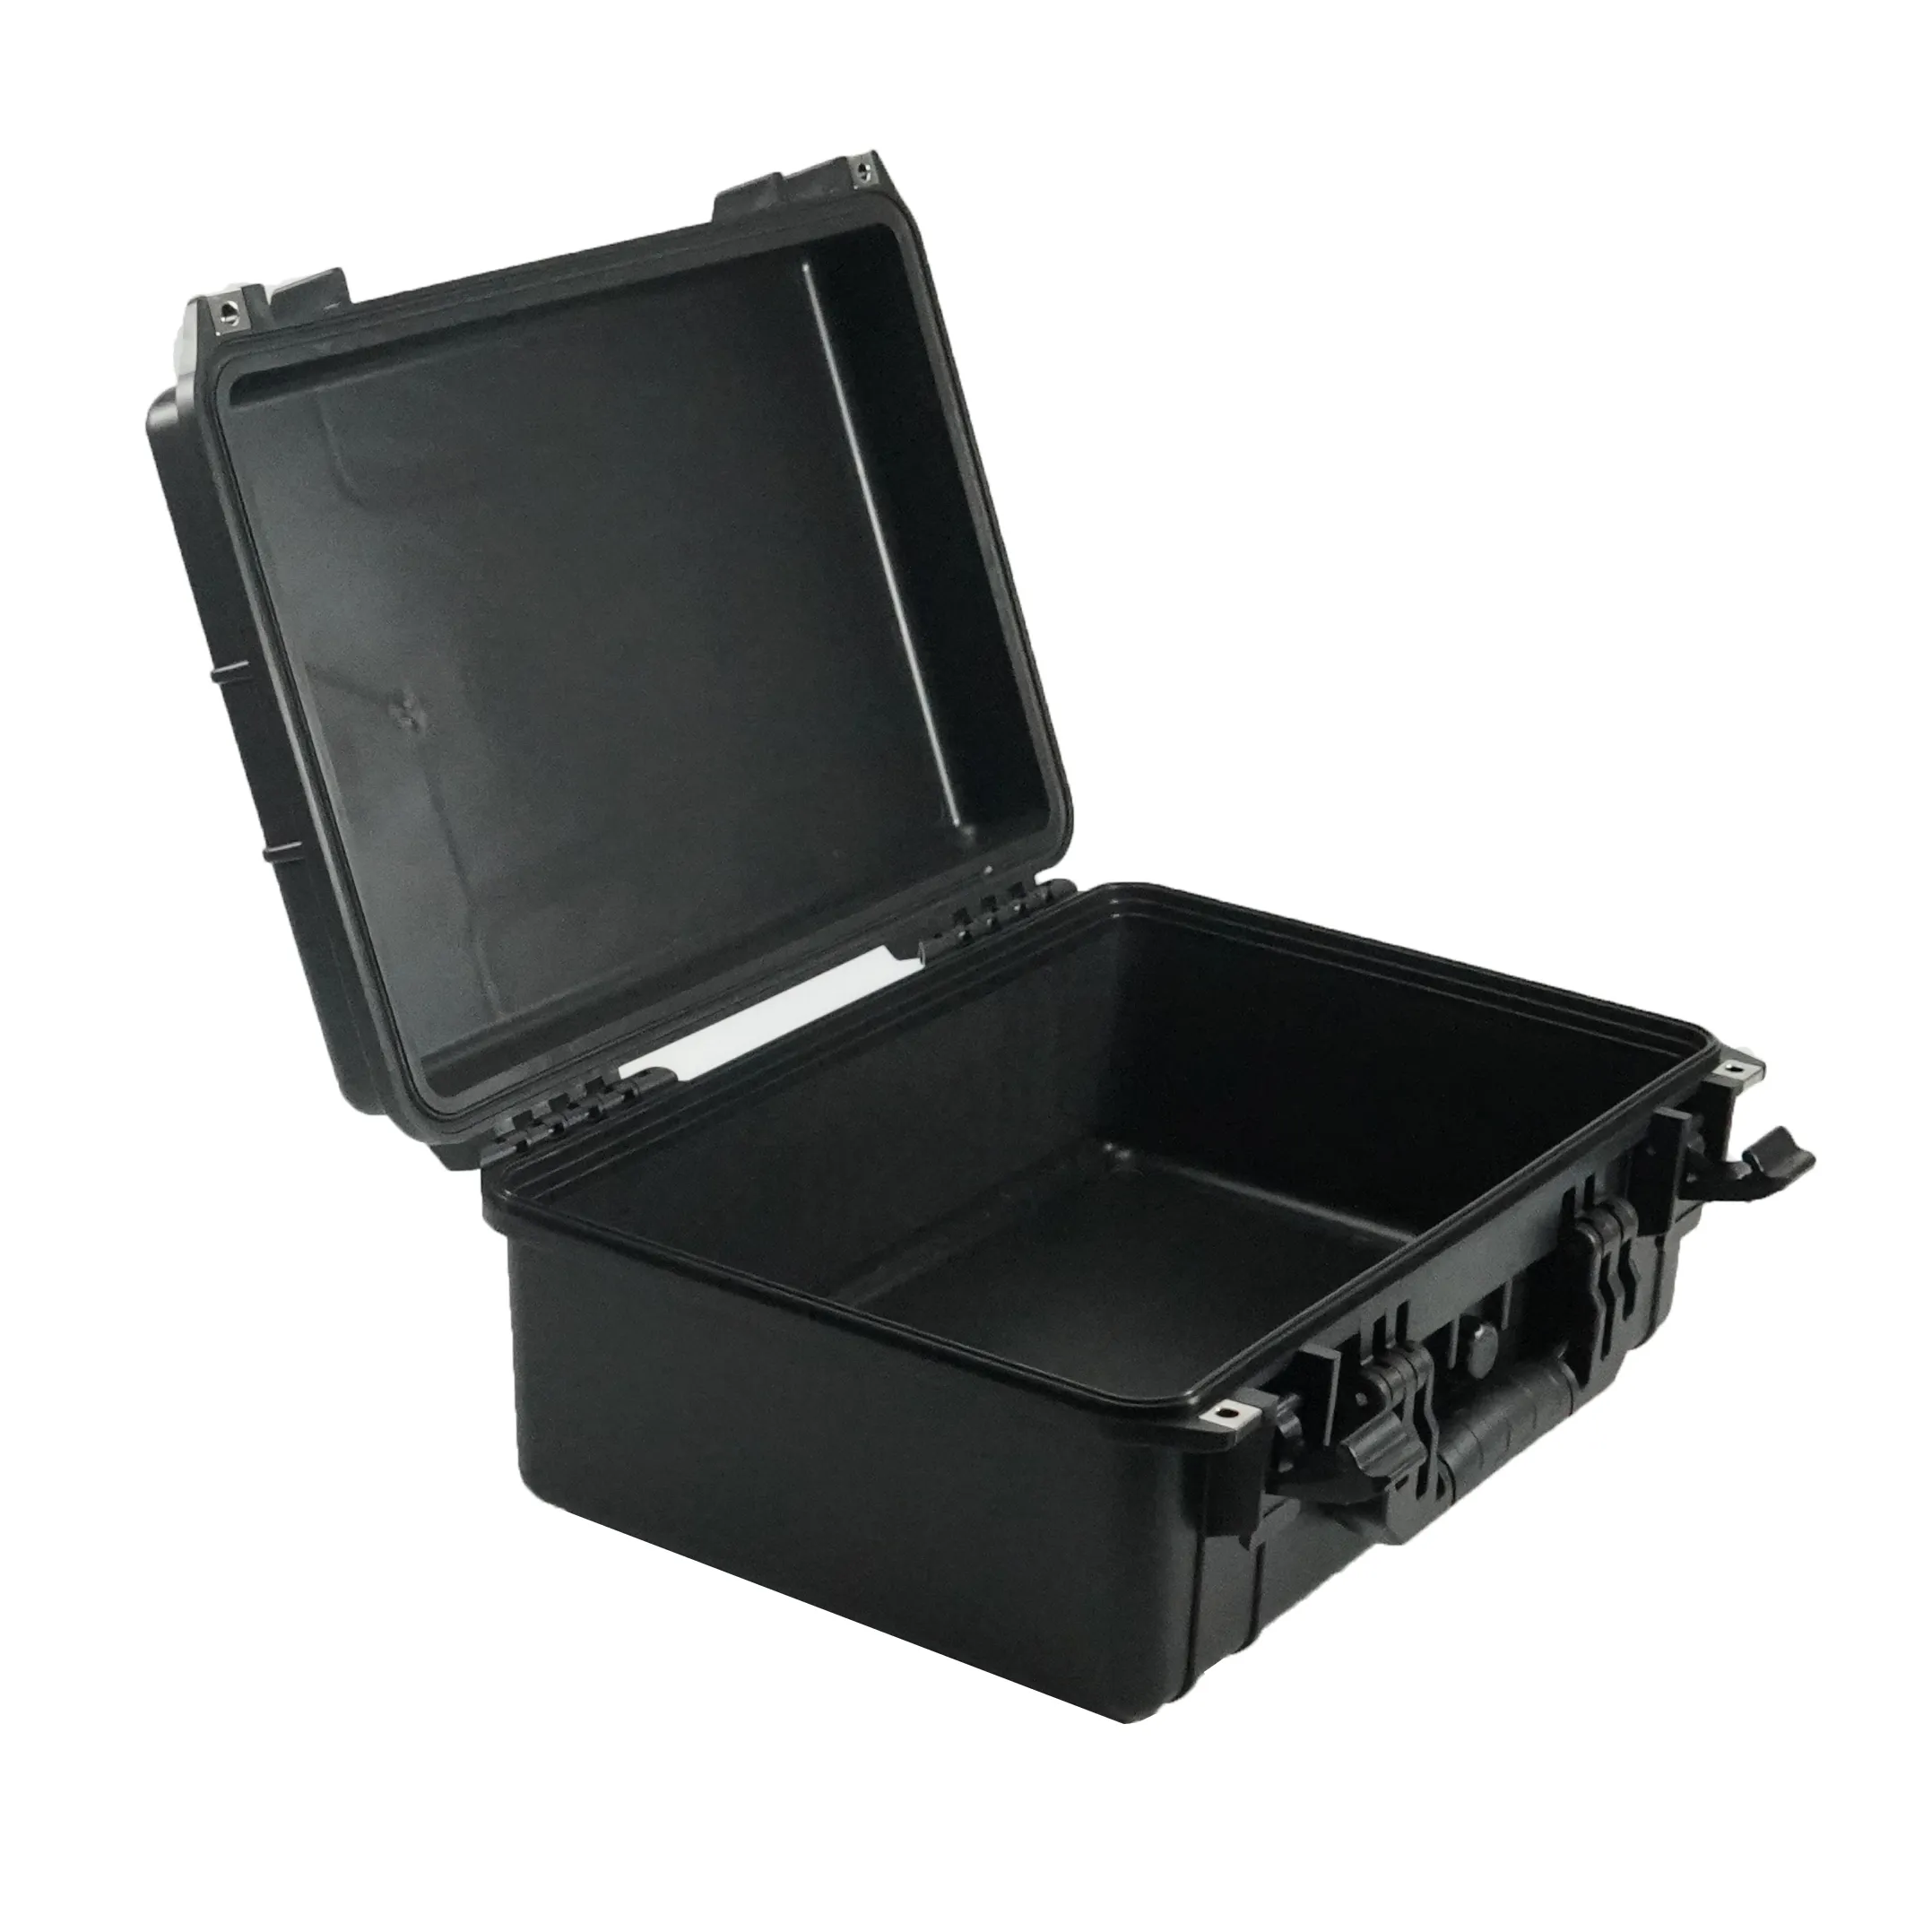 Waterproof Hard Carry Tool Case Plastic Toolbox Equipment Protective Storage Box Organizer Black,weapon case